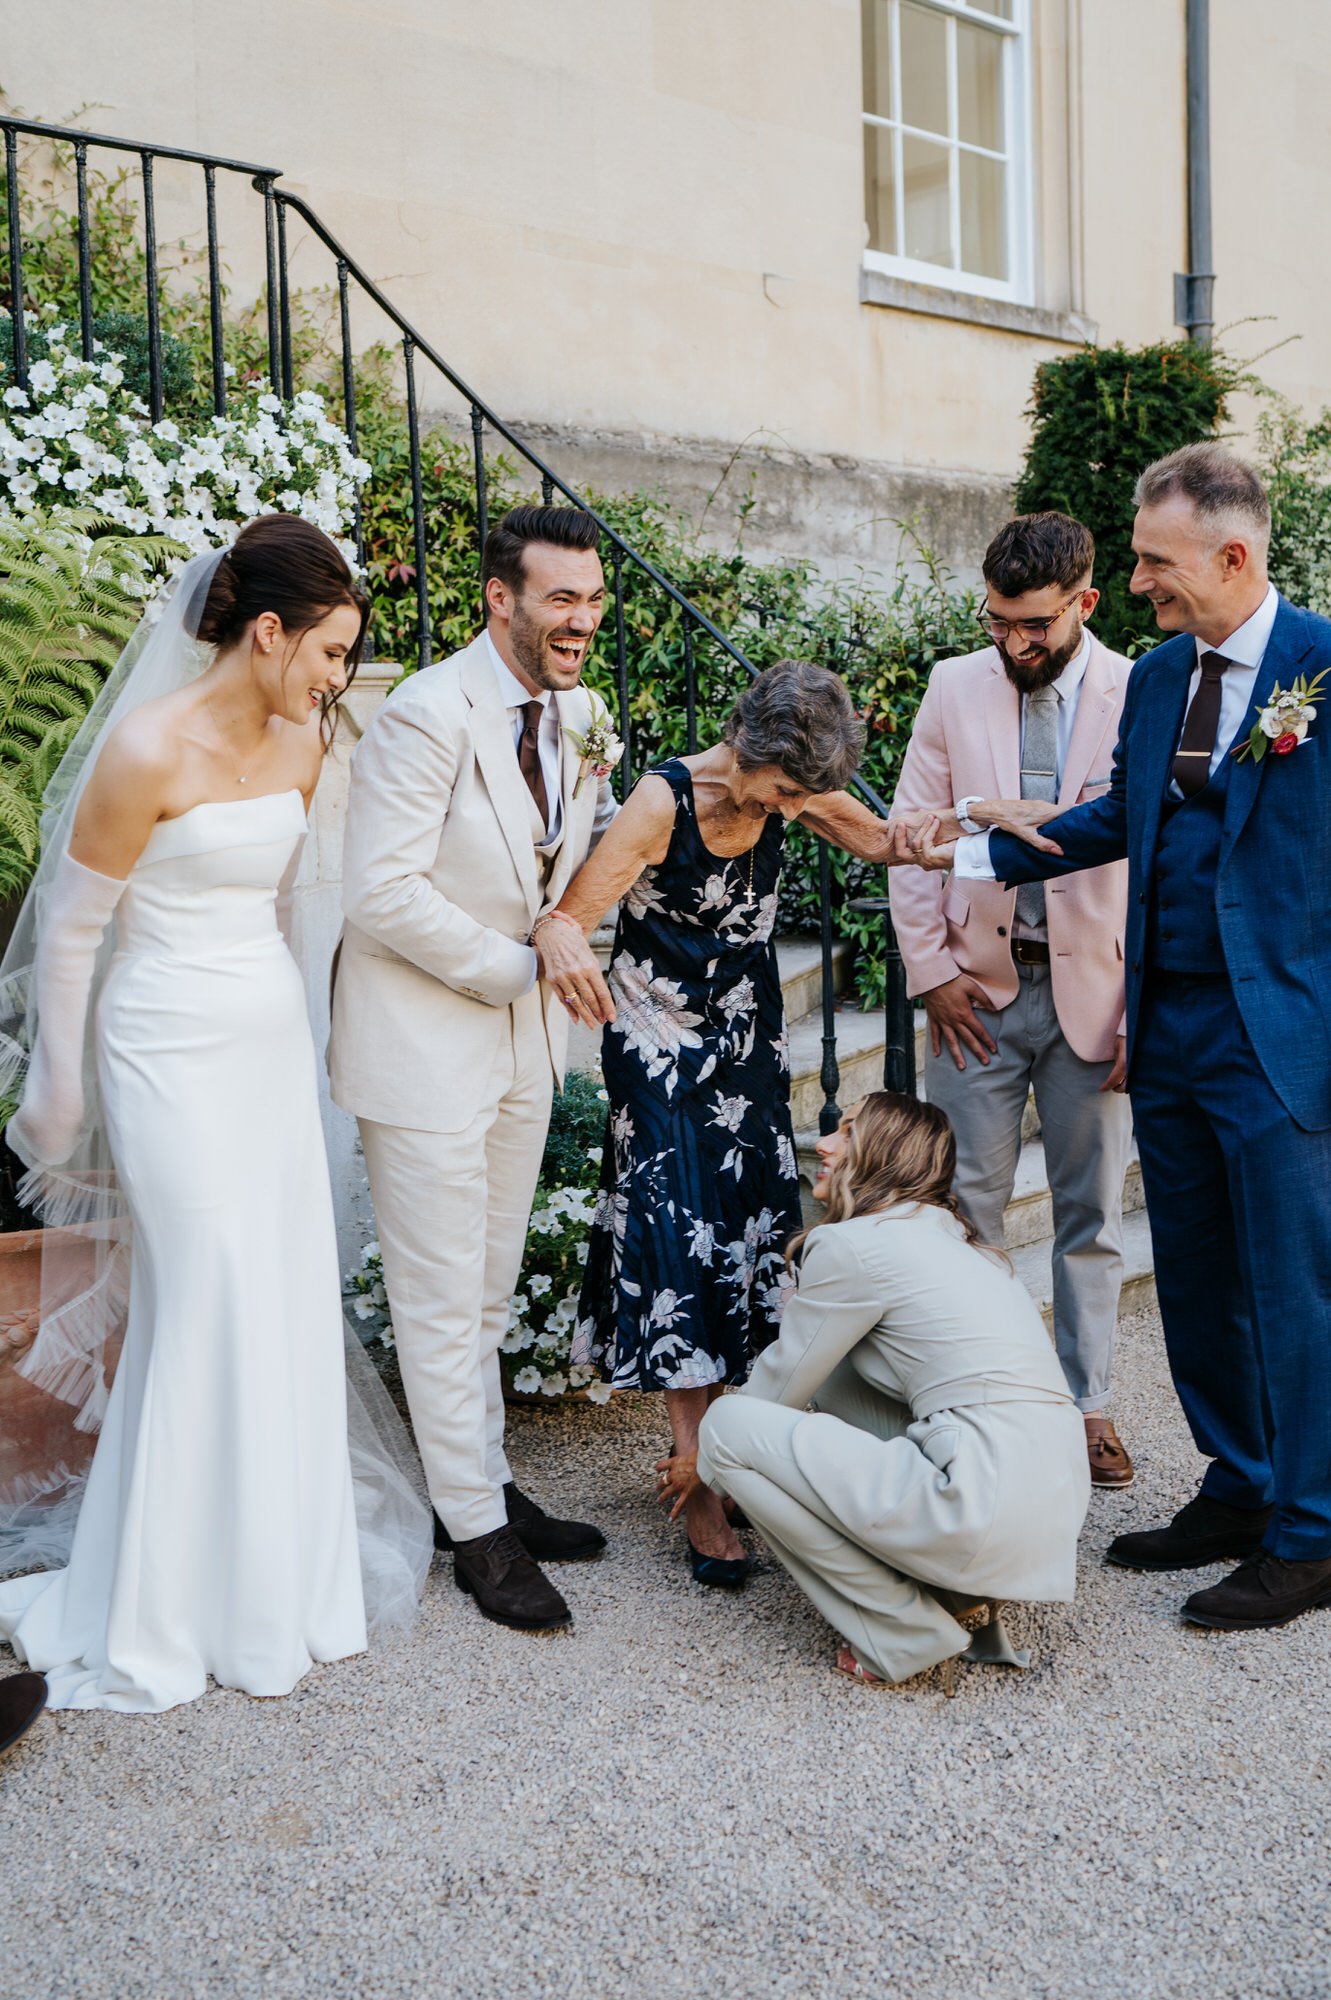 Groom in hysterics after funny moment while groom's sister helps the grandmother into her shoes during formal family photos at Syon Park